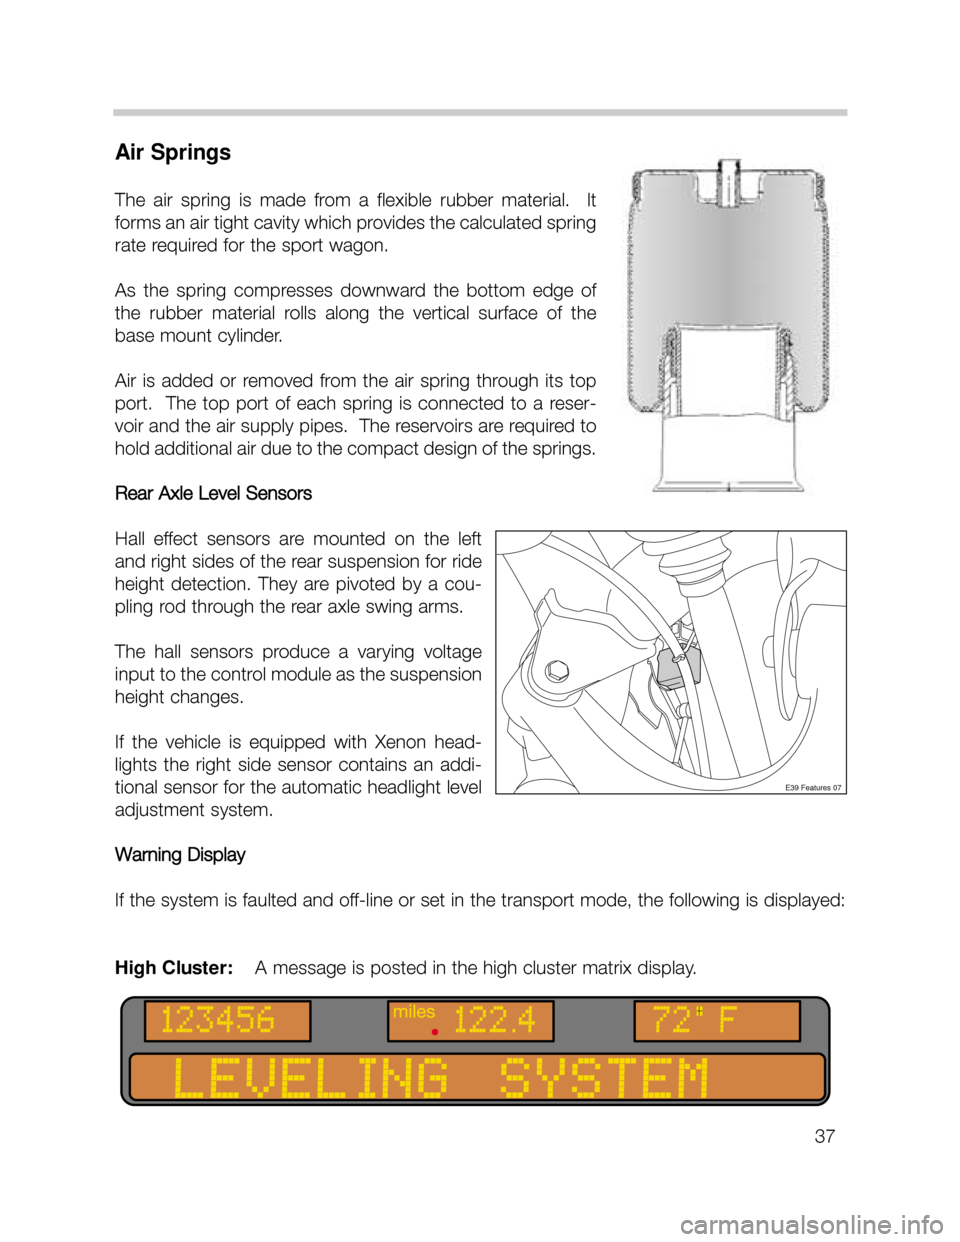 BMW X5 2004 E53 Workshop Manual Air Springs
The  air  spring  is  made  from  a  flexible  rubber  material.    It
forms an air tight cavity which provides the calculated spring
rate required for the sport wagon.
As  the  spring  co